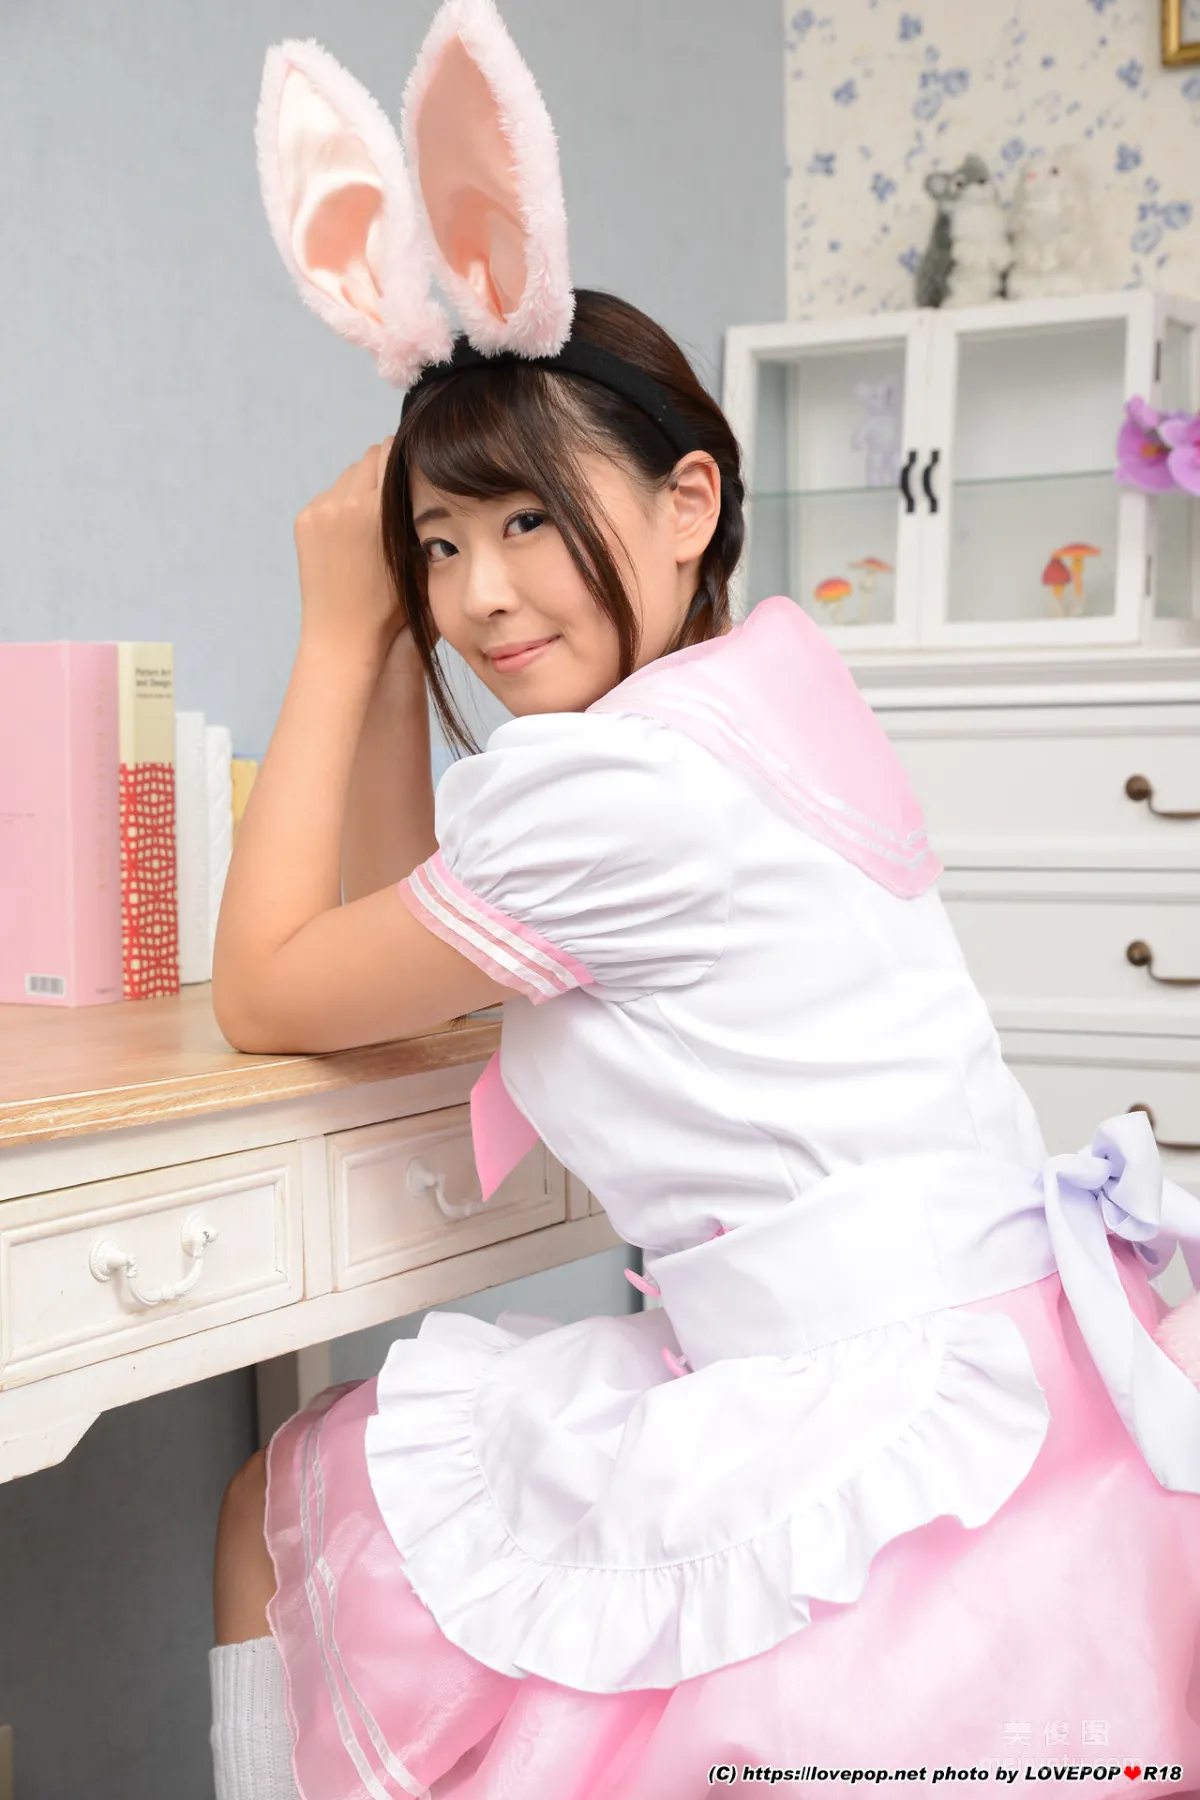 [LOVEPOP] Special Maid Collection - さとう愛理 Photoset 042